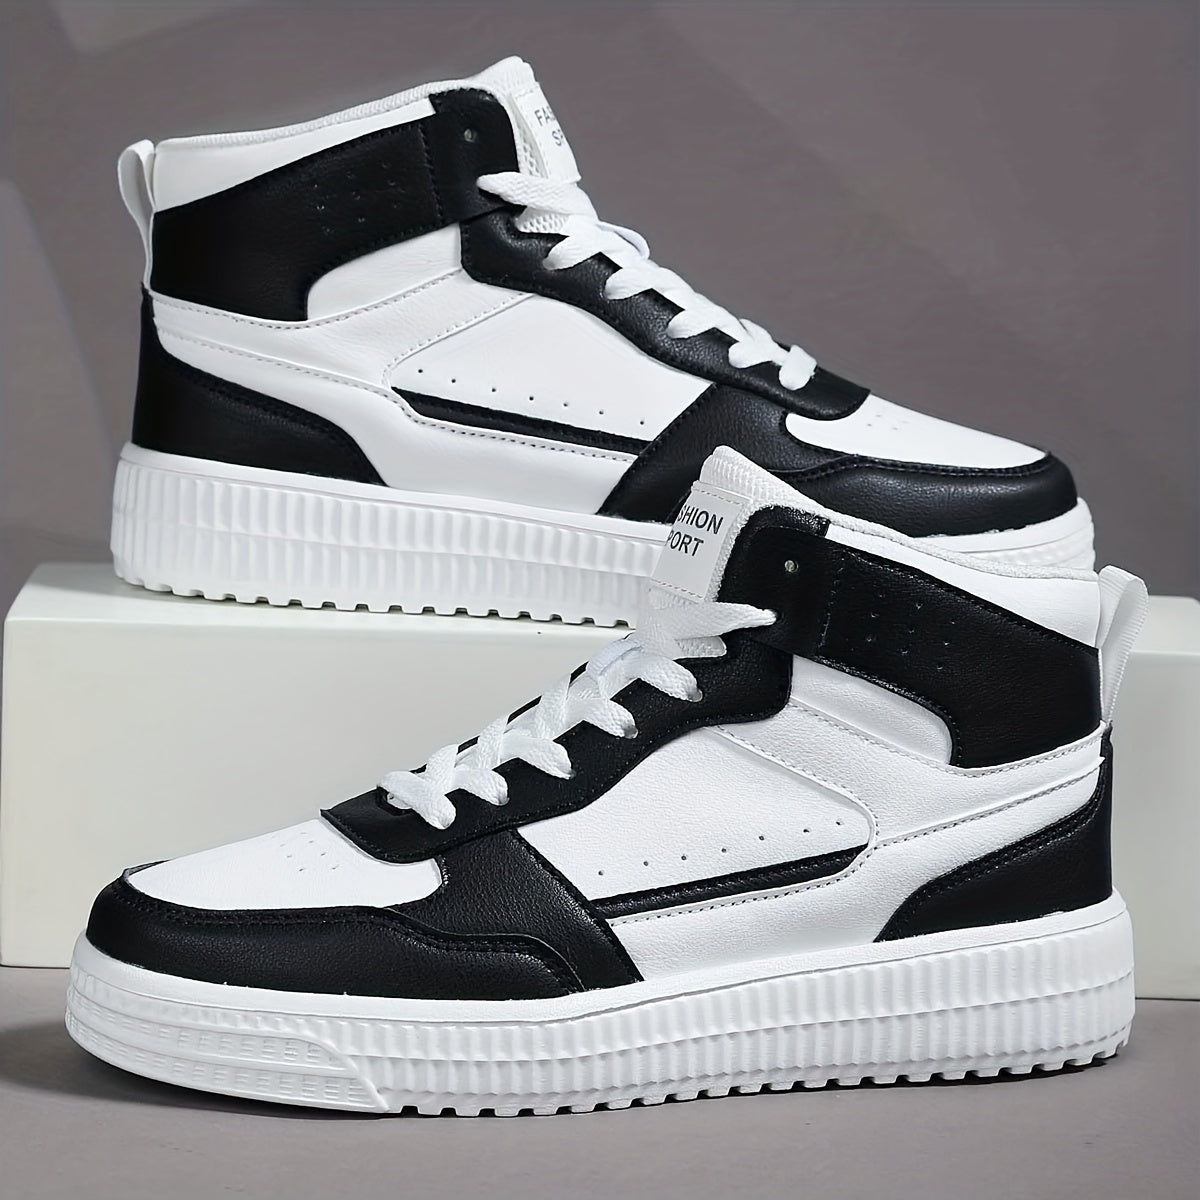 Men's High Top Skate Shoes With Good Grip, Lace-up Sneakers, Men's Footwear